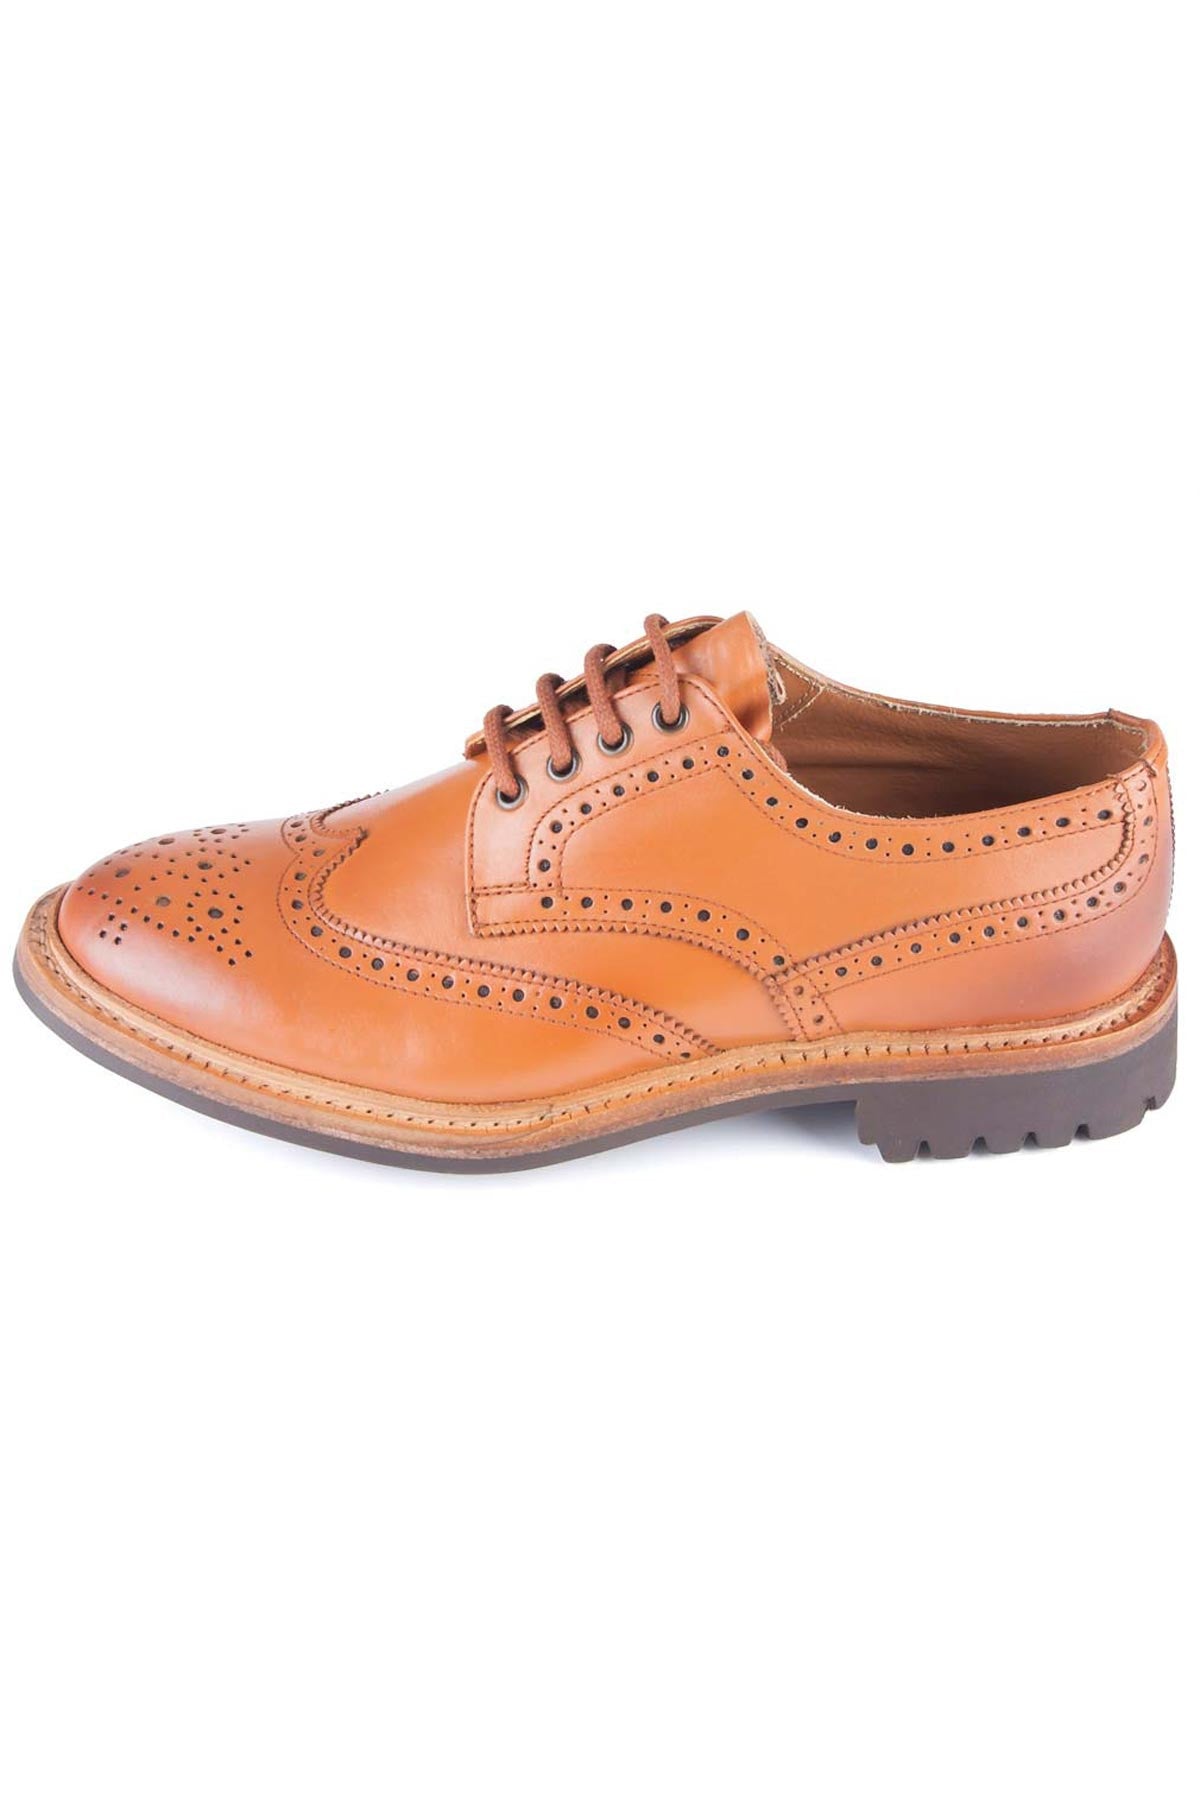 Mens Brogue Leather Shoes with Rubber Soles UK | Rydale